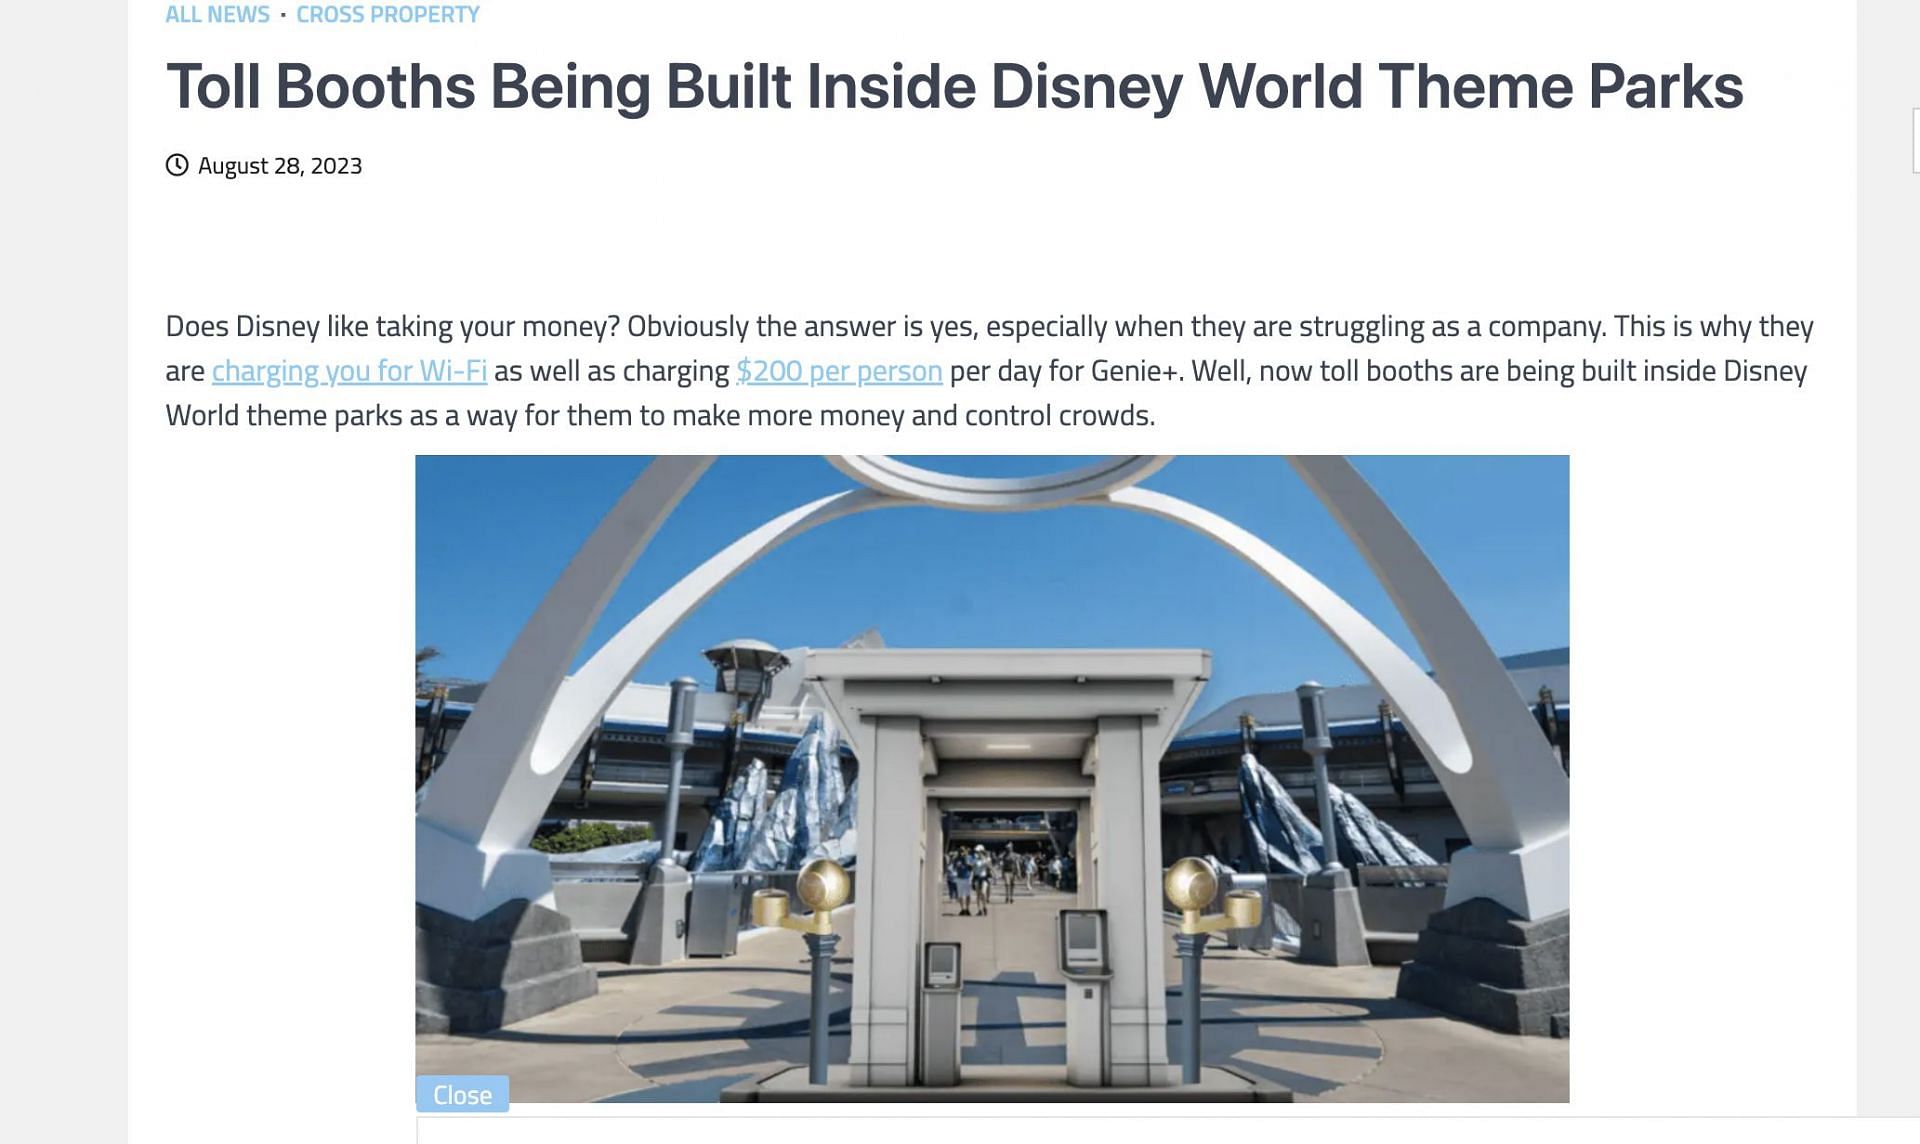 Disney is not installing toll booths inside the theme park: All about the fake news being reported by a satirical website. (Image via Mouse Trap News)